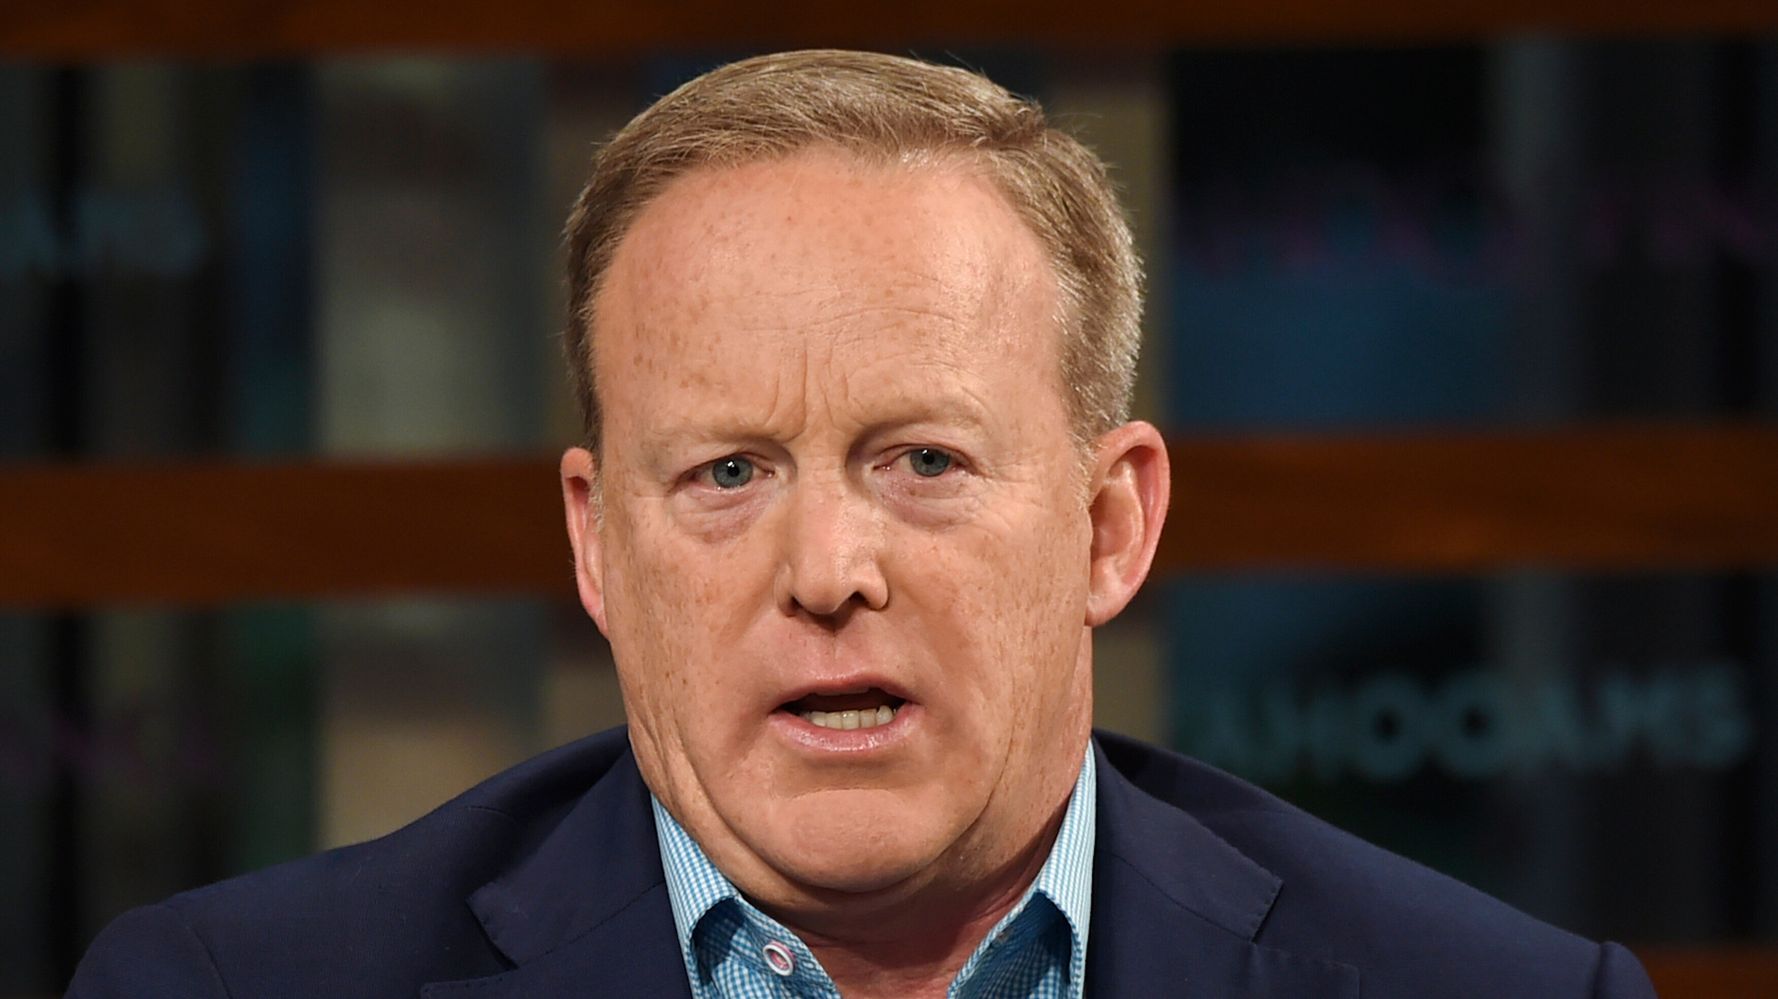 Sean Spicer Says He Won't Work For Donald Trump If He Runs In 2024